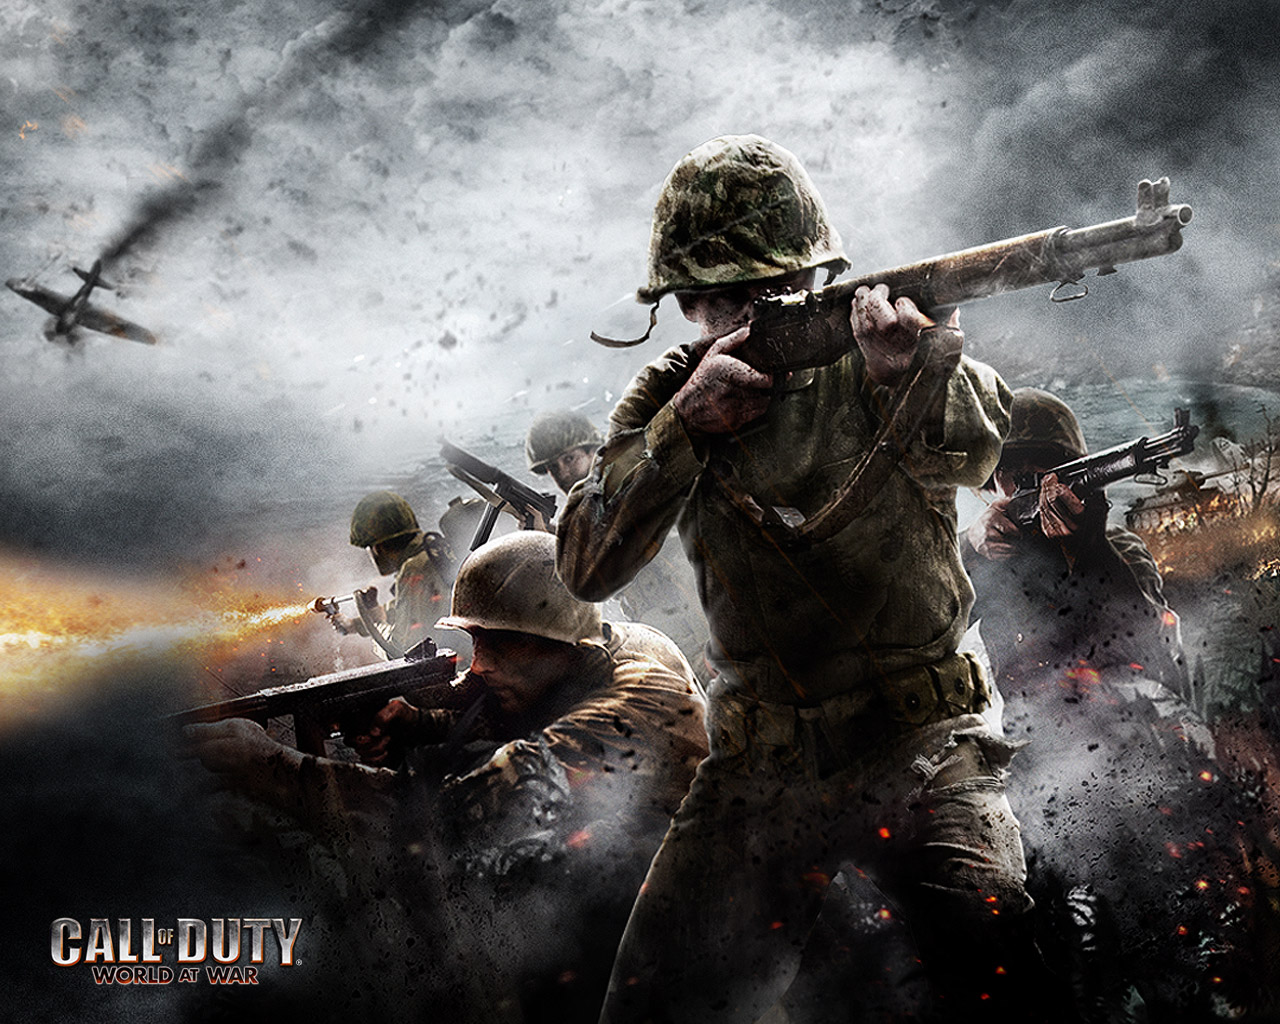 Awesome Call Of Duty World At War HD Wallpaper Free Download